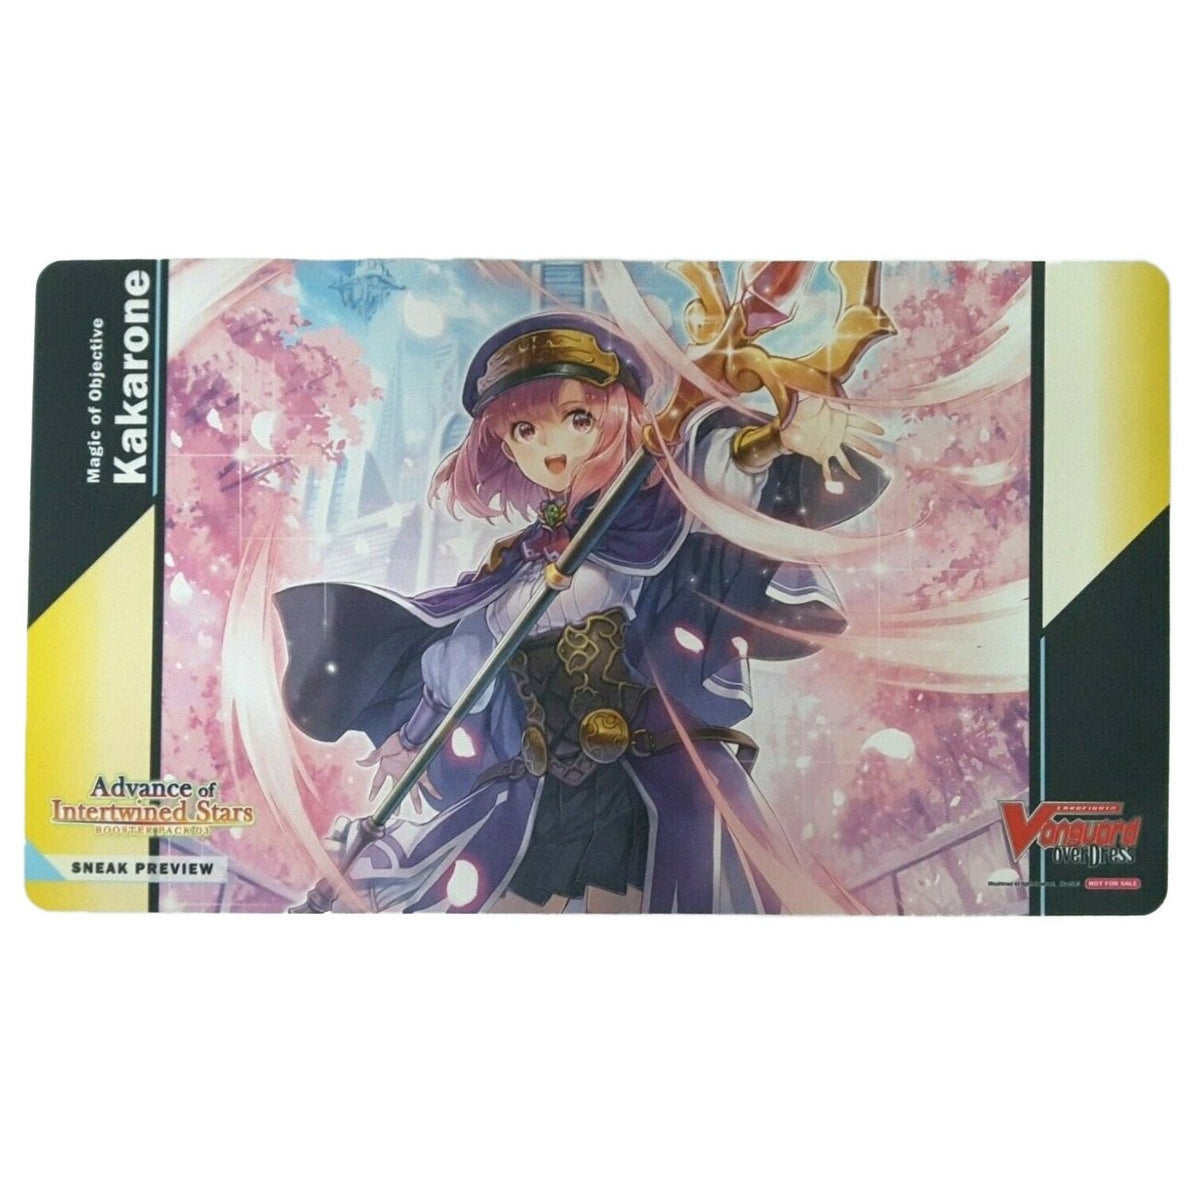 Cardfight!! Vanguard overDress Advance of Intertwined Stars (Sneak Preview Box Set) [VGE-D-BT03] (English)-Bushiroad-Ace Cards &amp; Collectibles